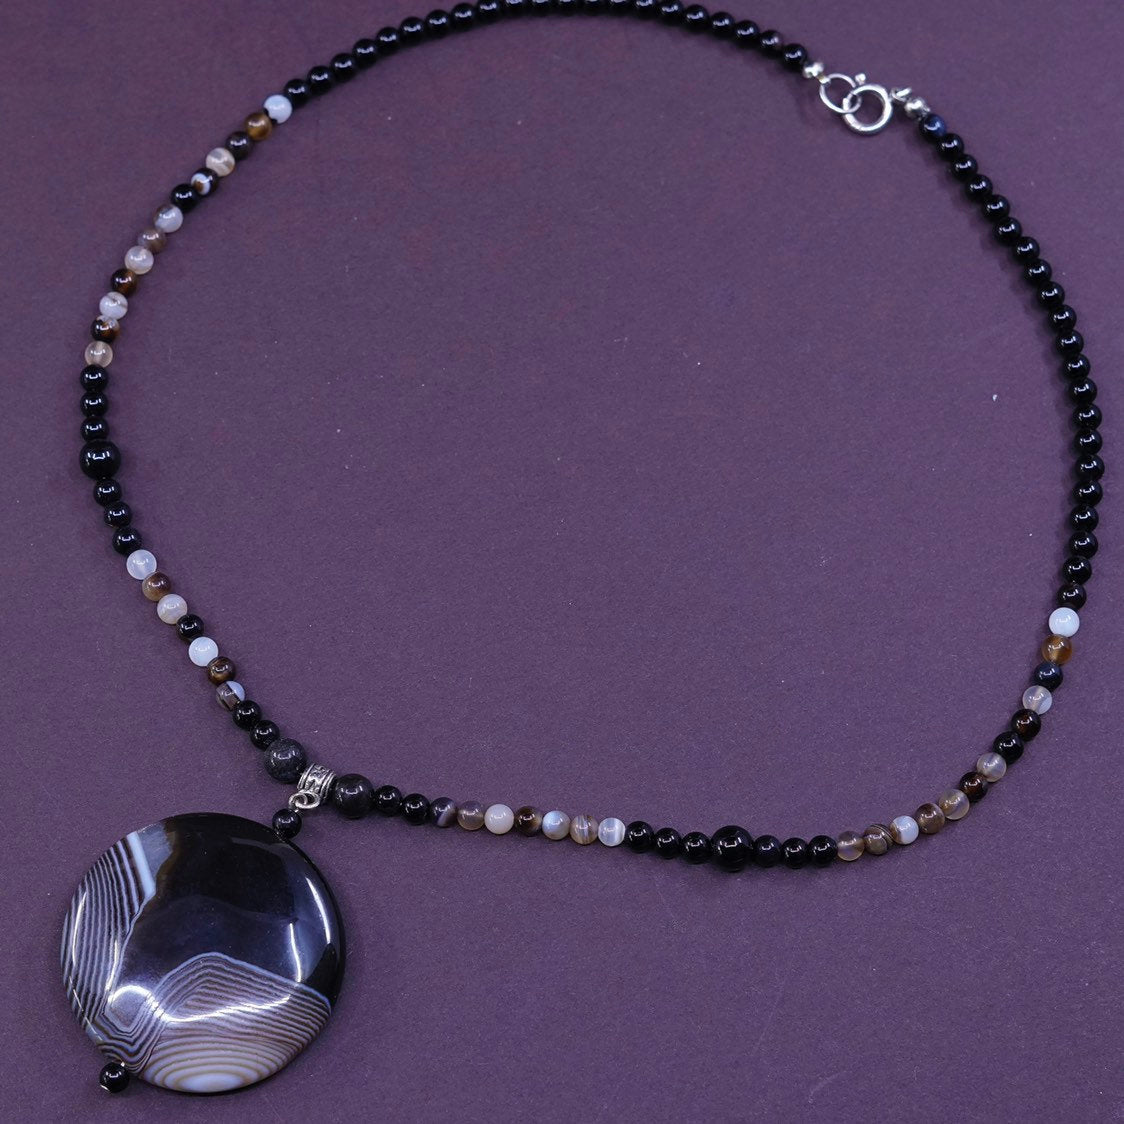 20”, sterling silver handmade necklace, 925 clasp W gemstone N agate pendant